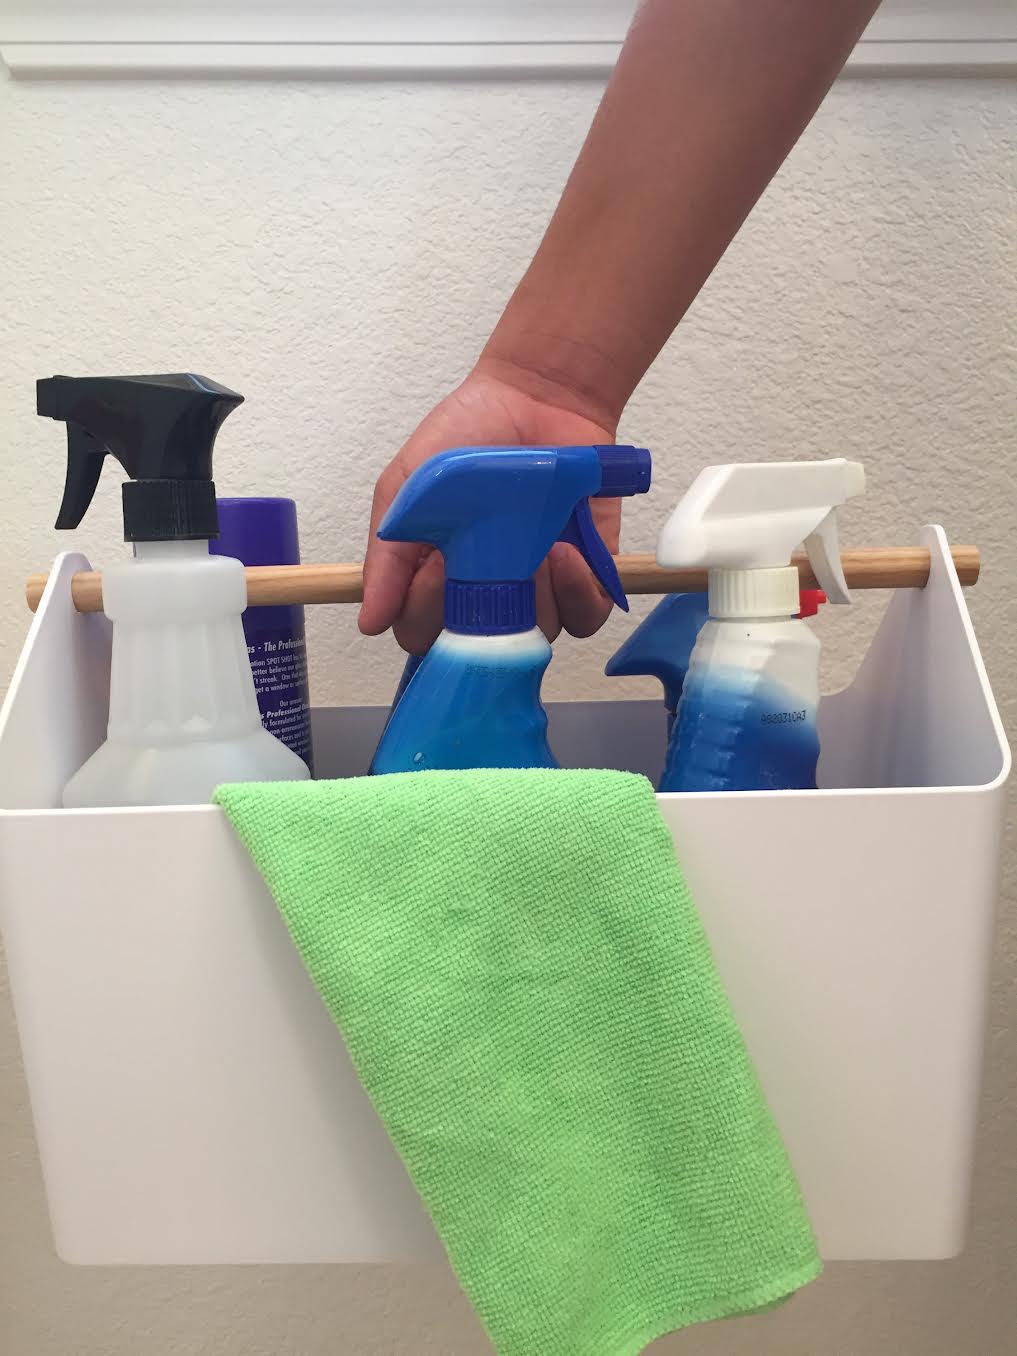 I'm a housekeeper - the 5 products I swear by, including a $3 glass cleaner